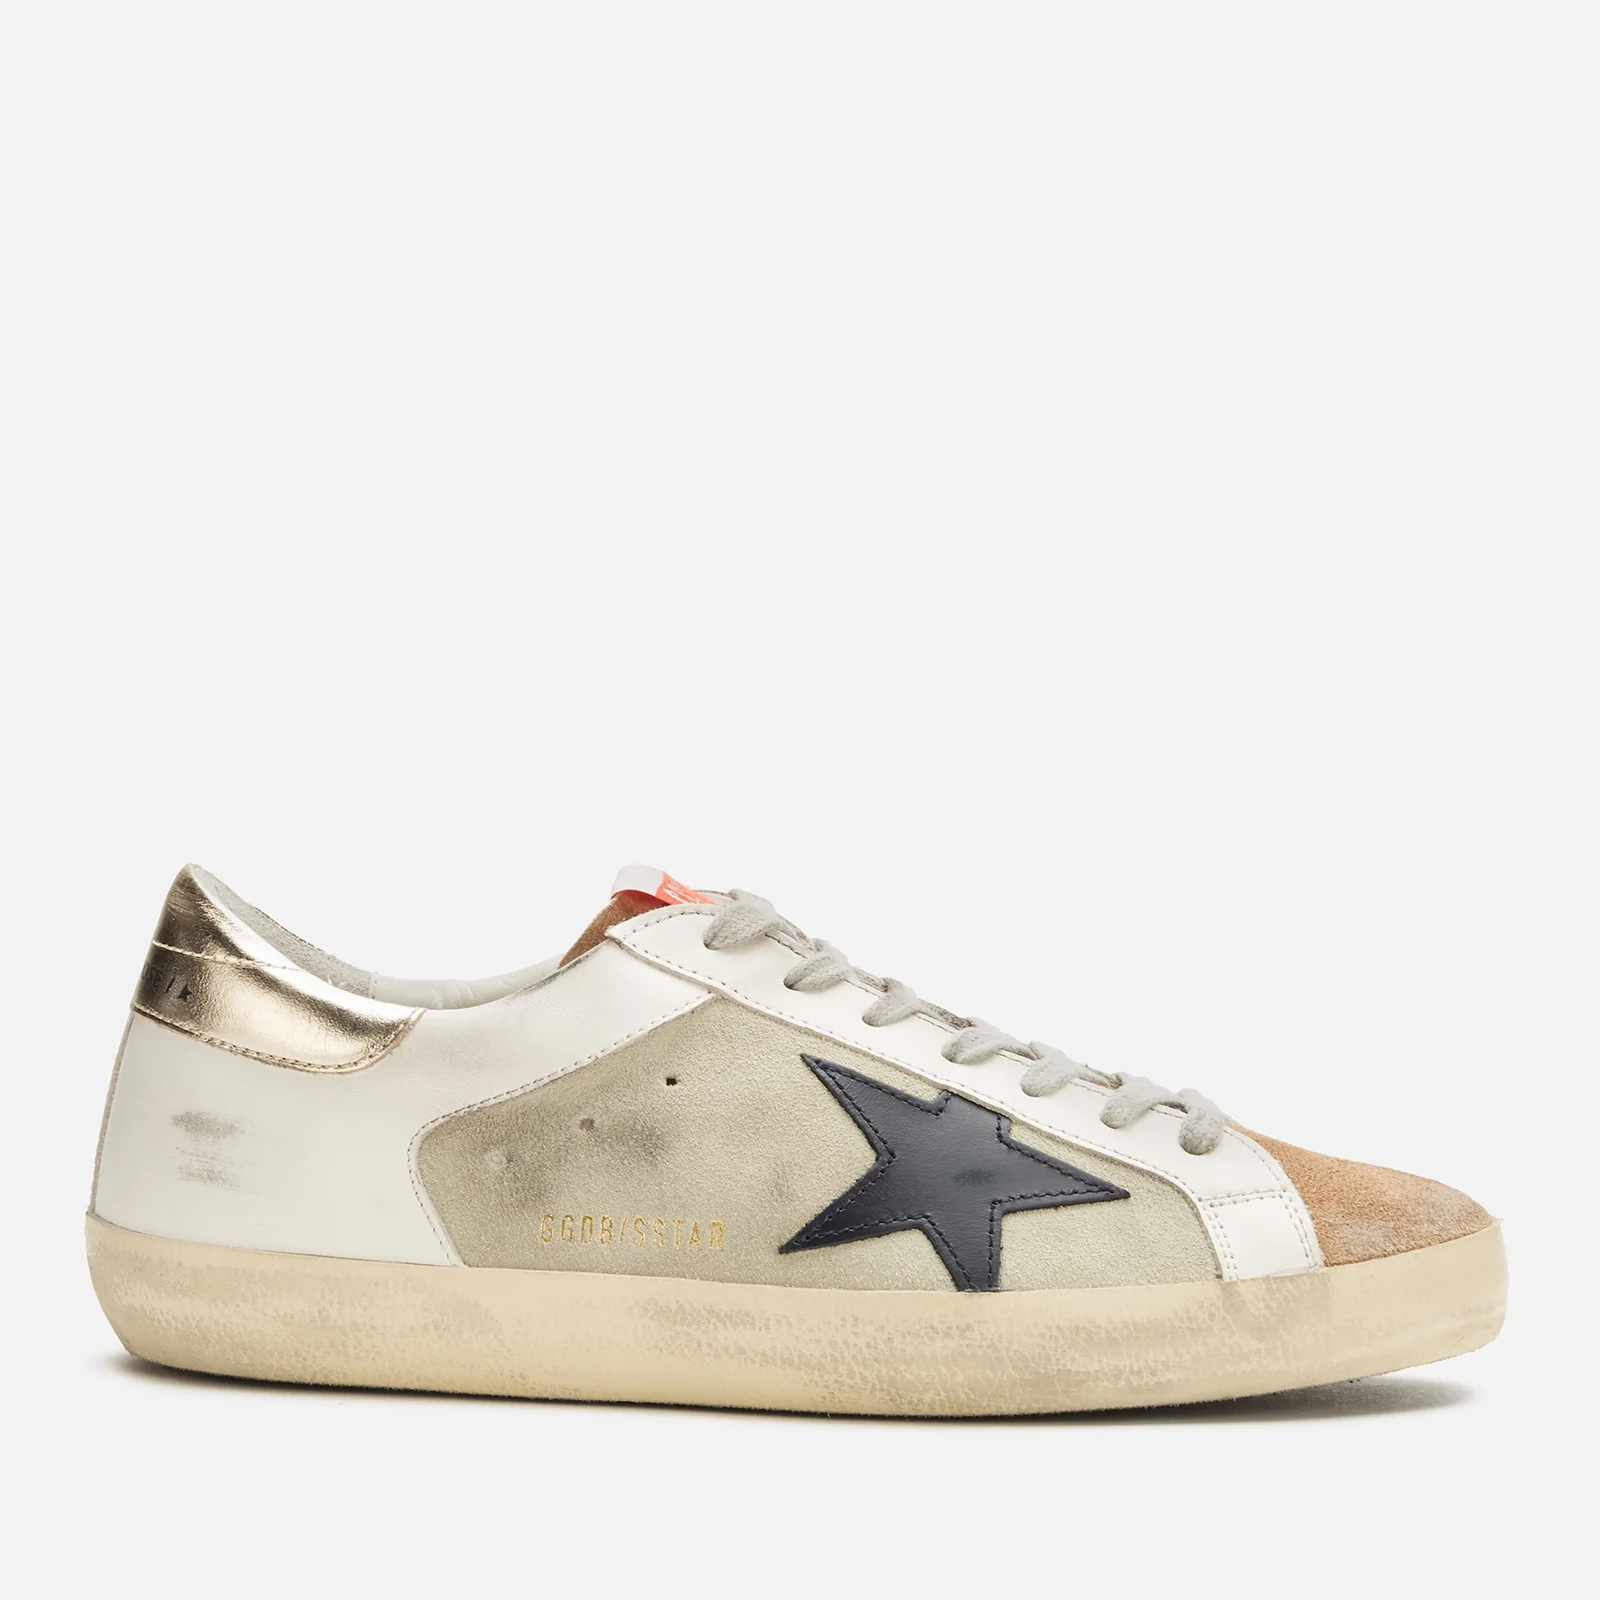 Golden Goose Men's Superstar Leather Trainers - Ice/White/Brown Image 1